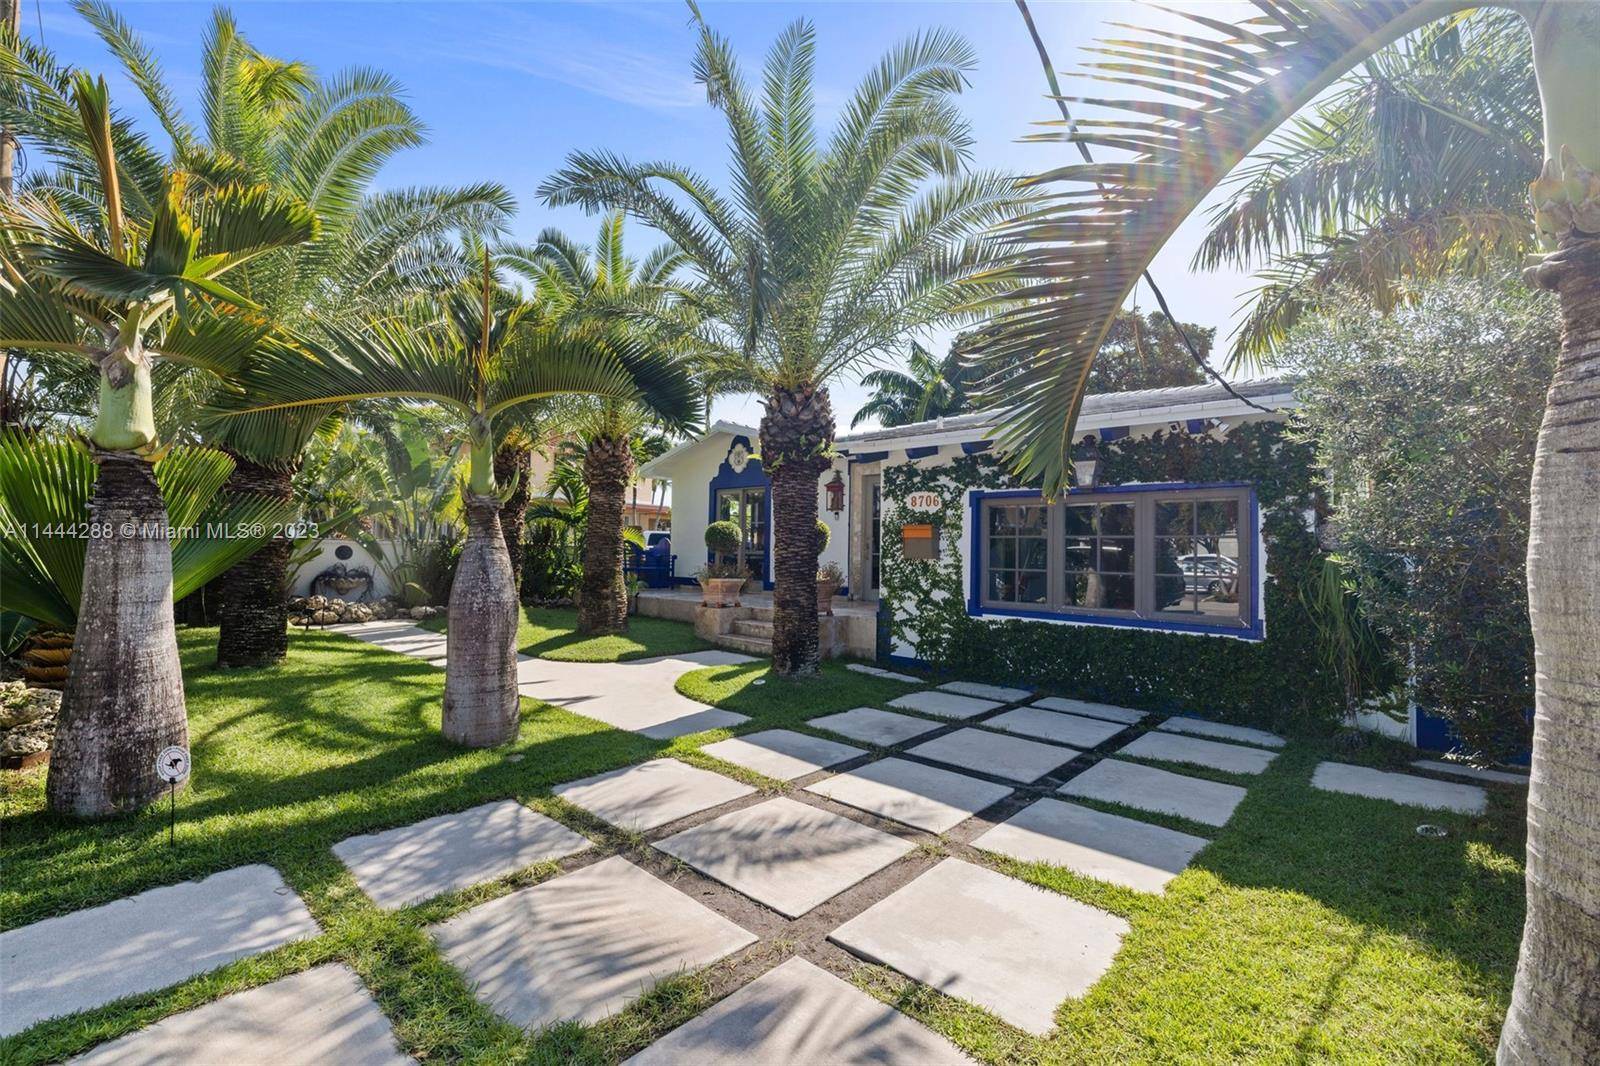 Nestled in the heart of Surfside, this enchanting home has been reimagined with thoughtful care and design.